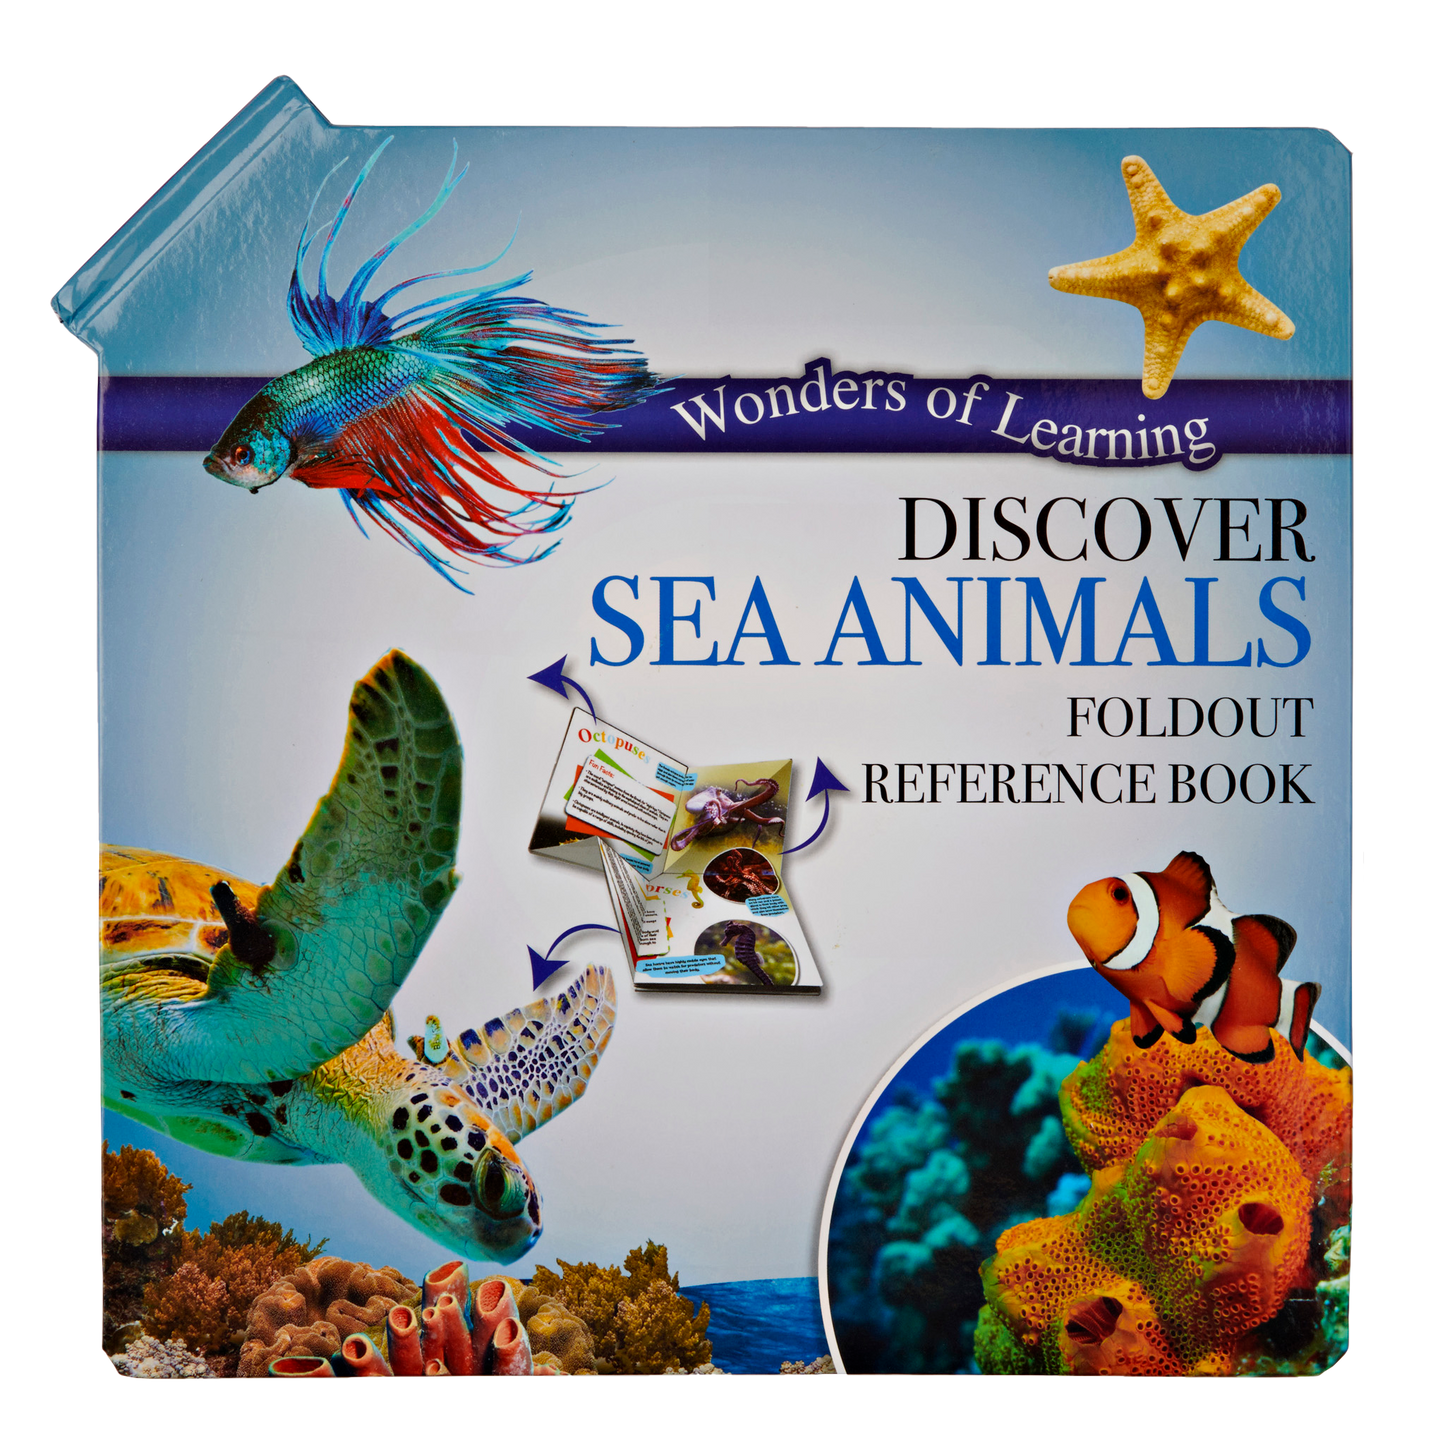 Discover Sea Animals Foldout Reference Book (Wonders of Learning)